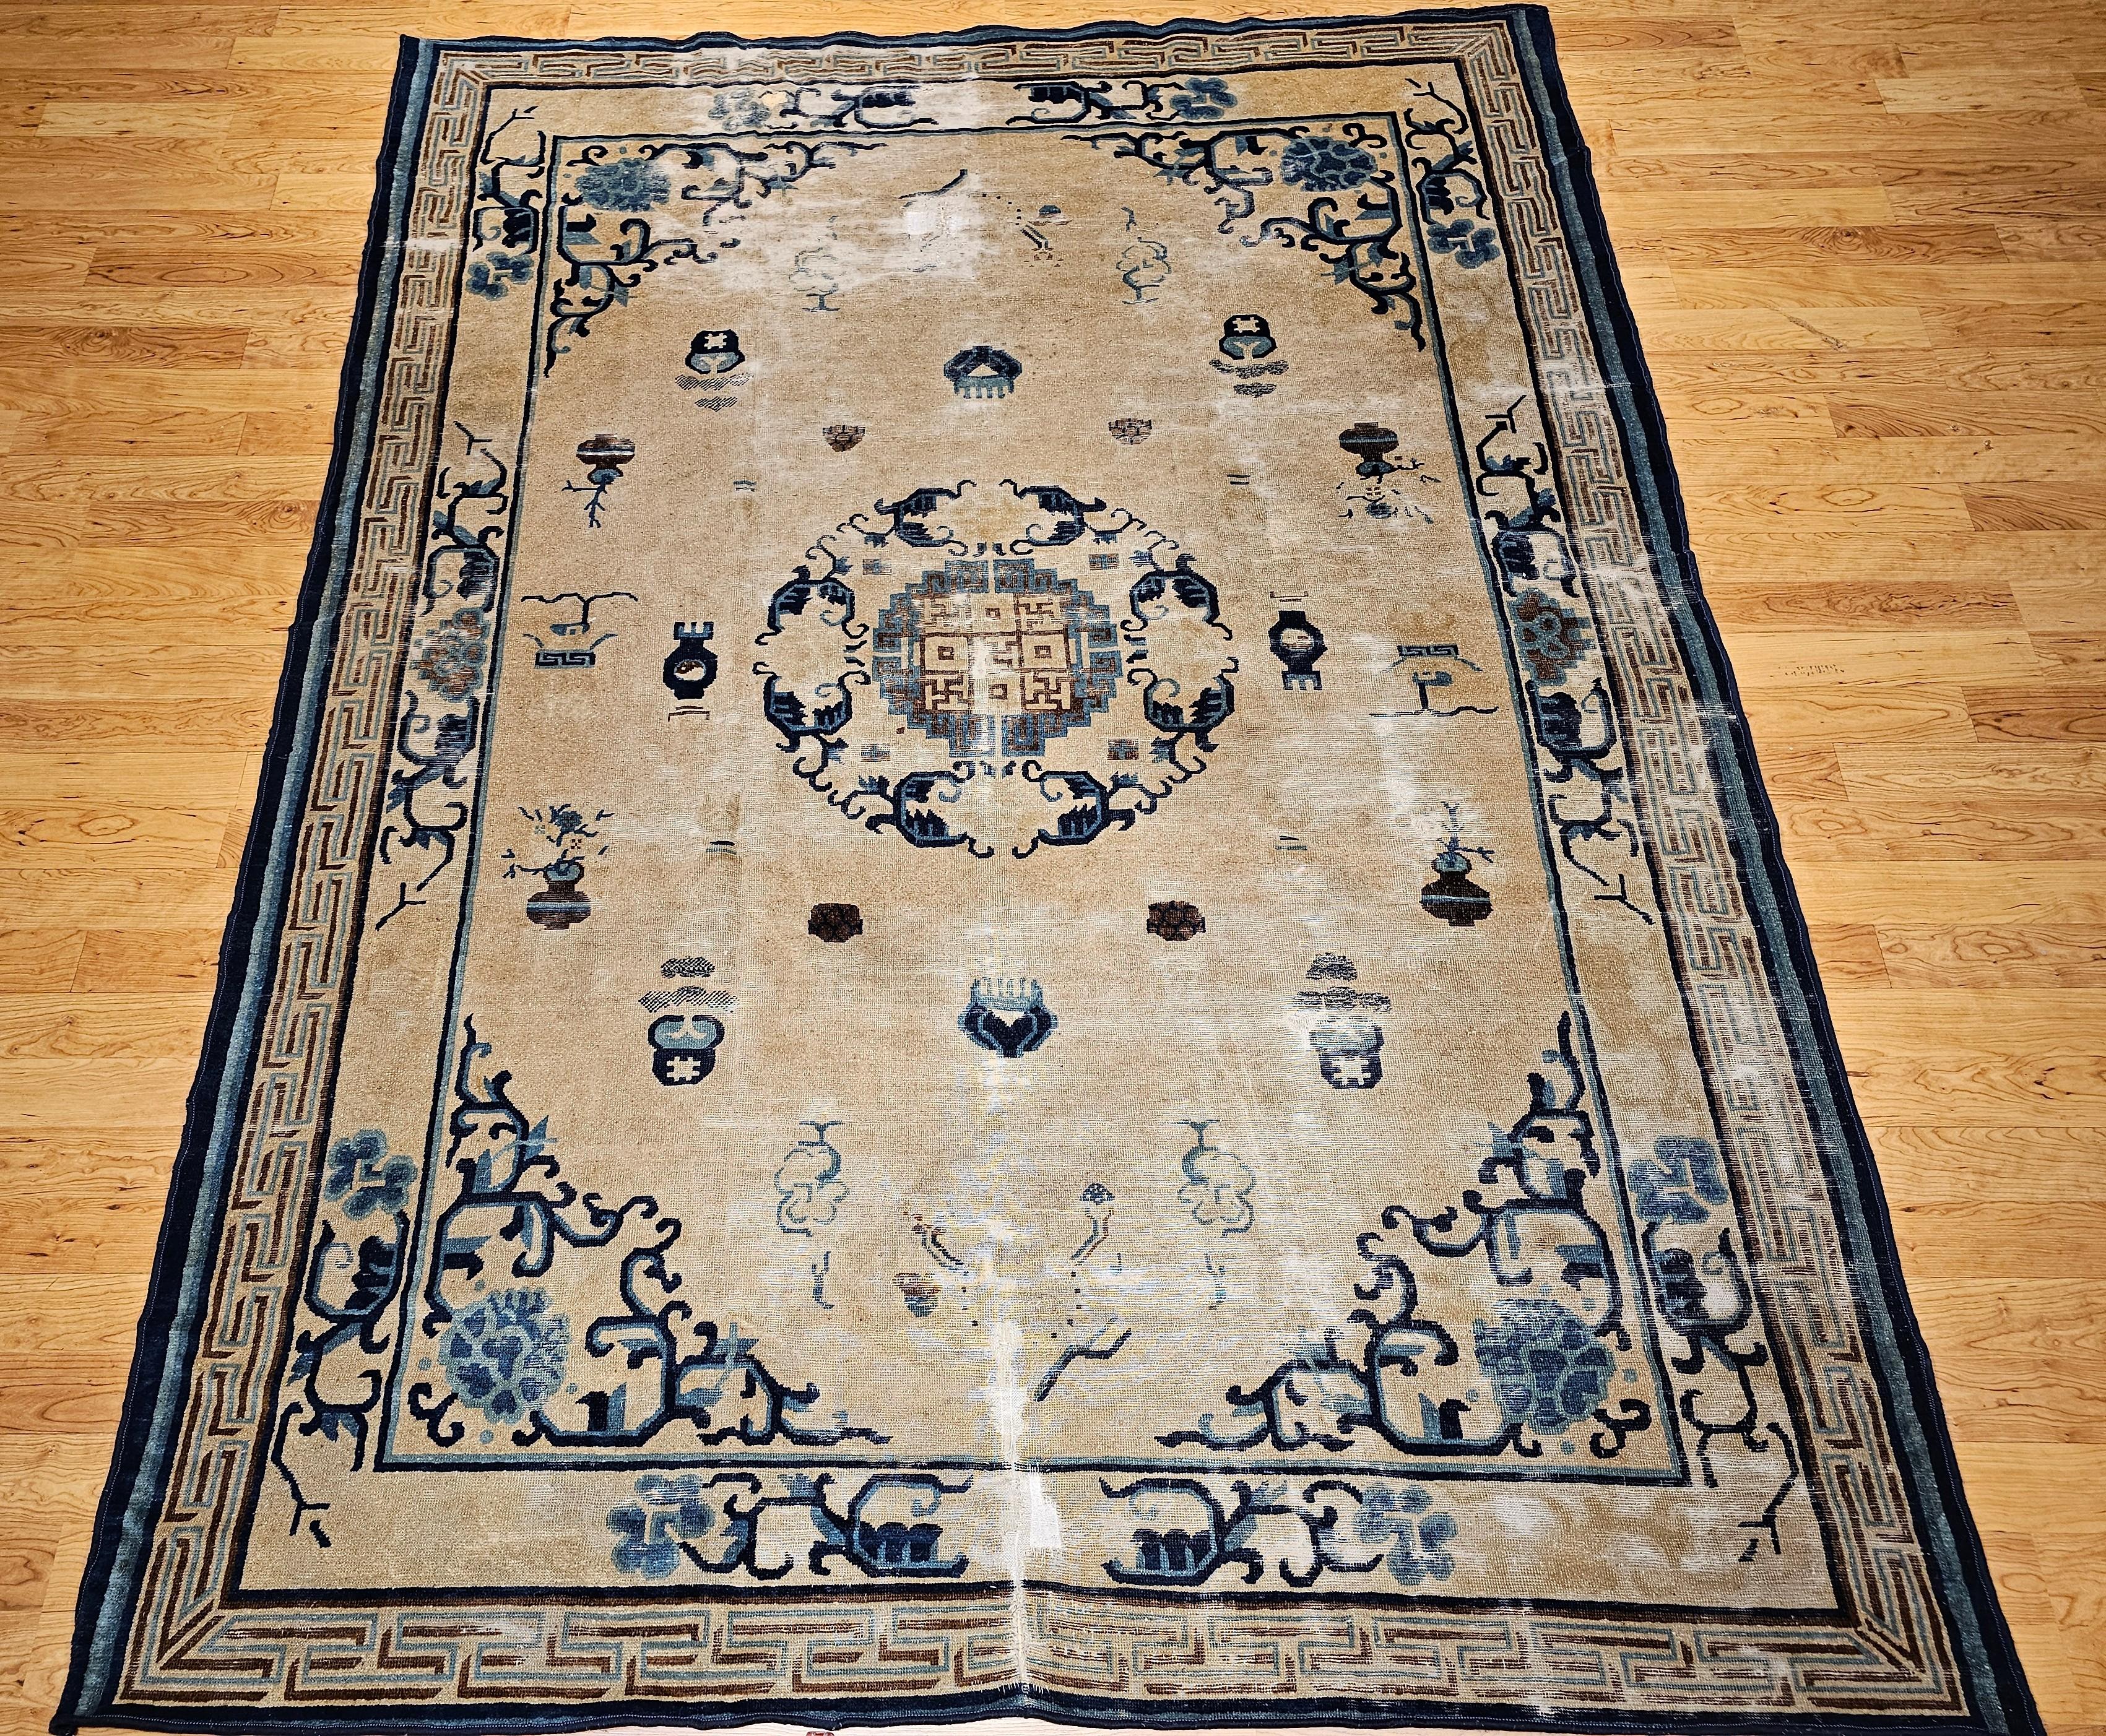 Chinese Peking with Lion Dog and Symbols for Fortune, Prosperity, and Long Life.  A beautiful distressed Chinese Peking room size rug from the 4th quarter of the 1800s. The rug has a very unique and beautiful gray field color with an open design.